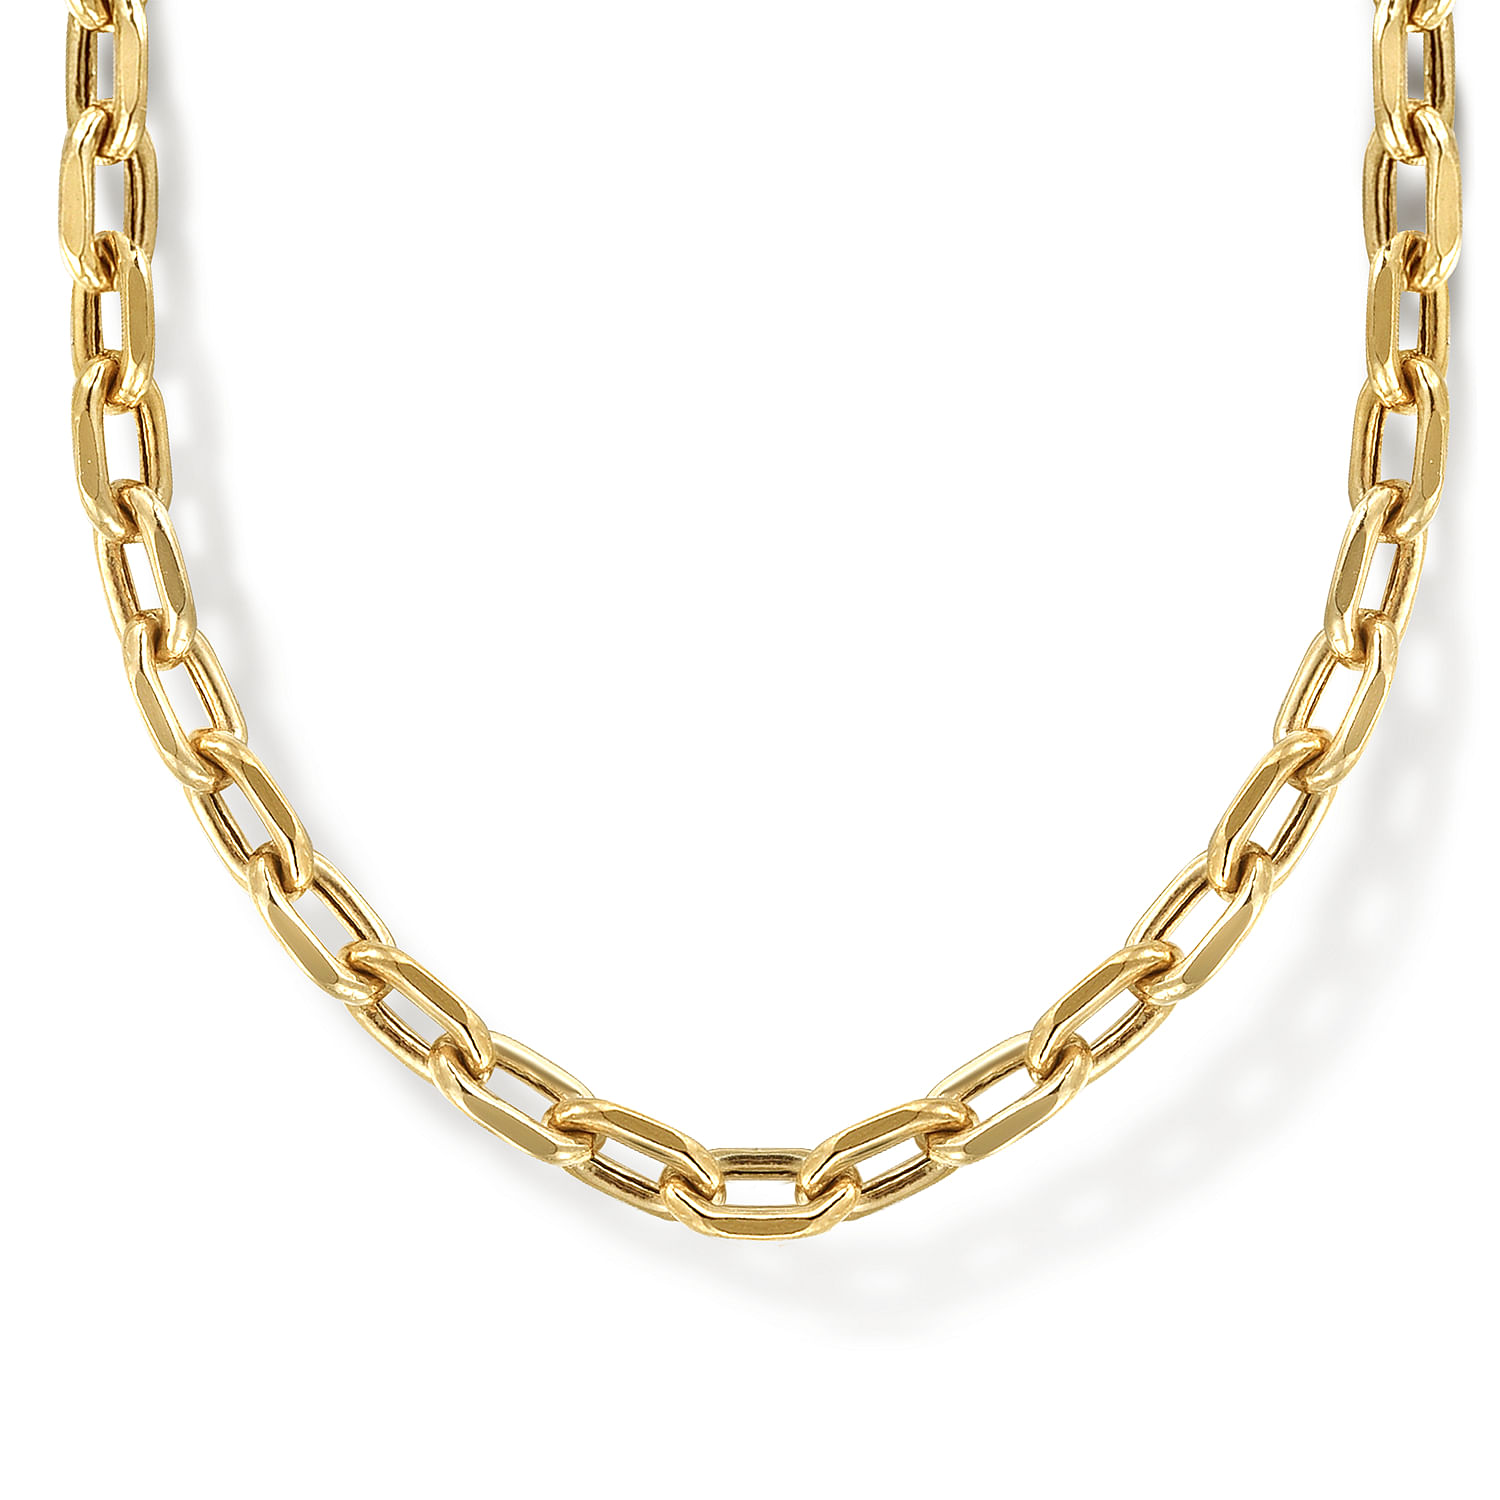 32 Inch 14K Yellow Gold Hollow Chain Necklace